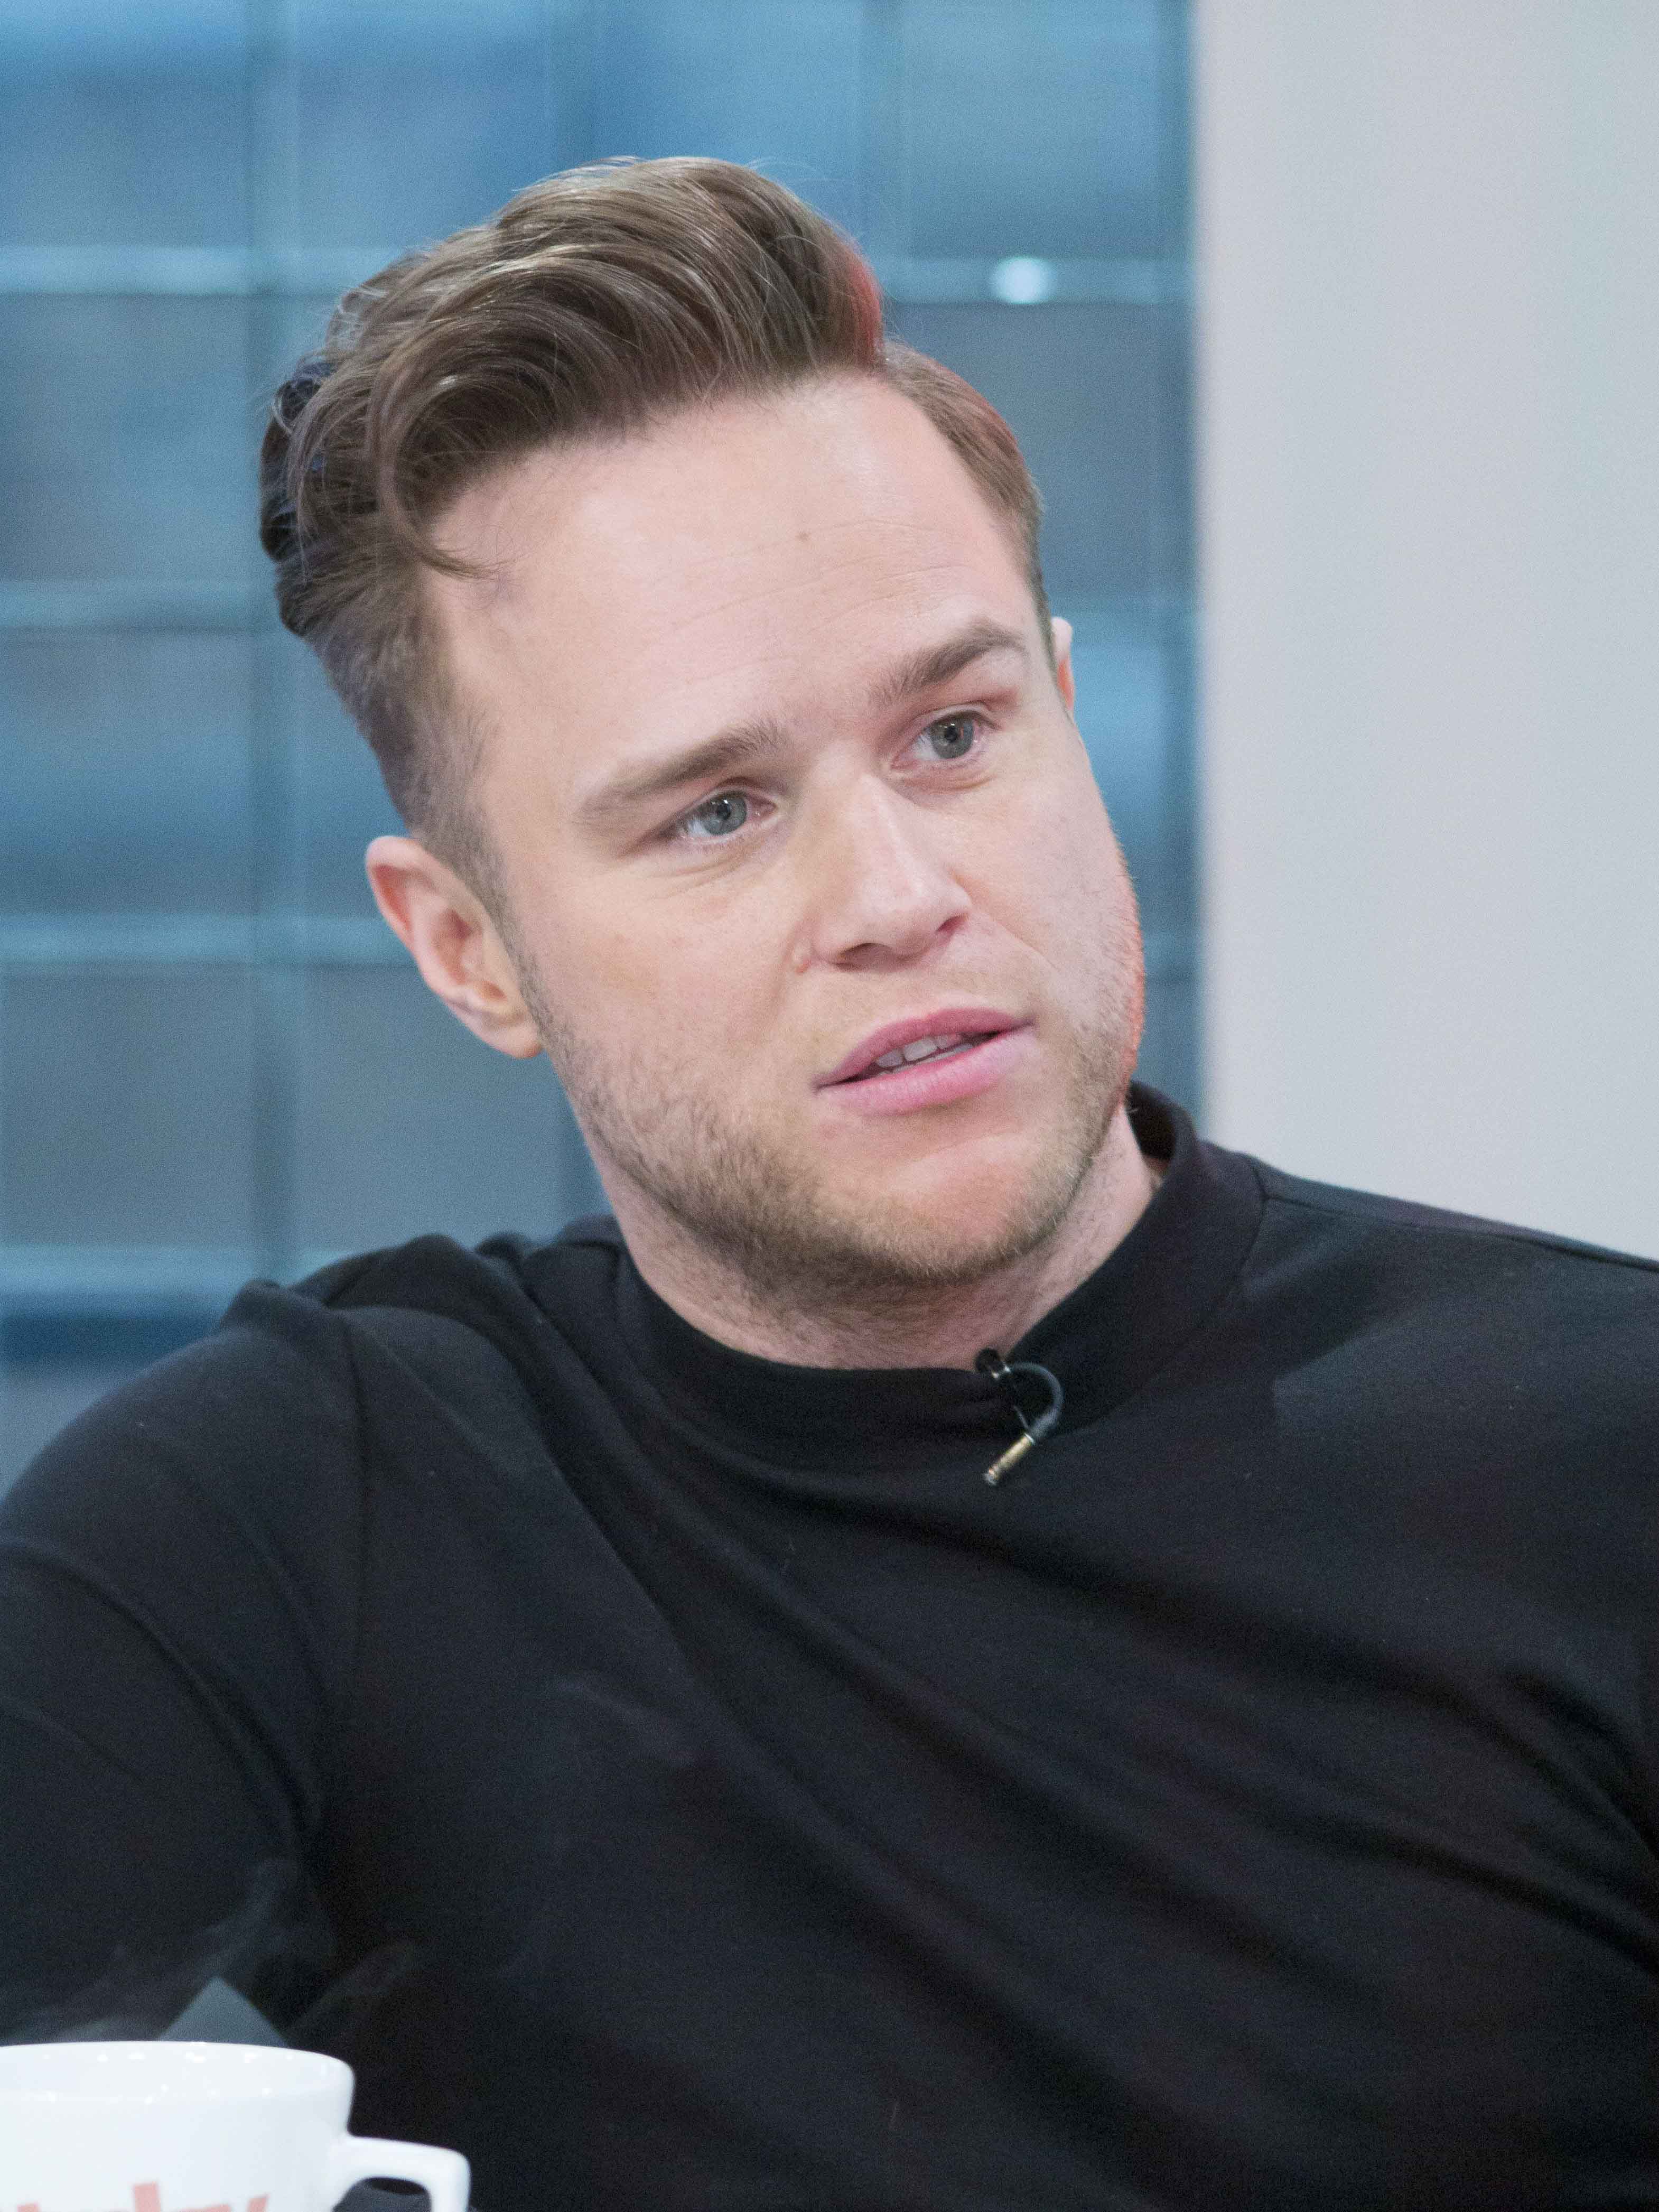 Olly Murs Wallpapers High Quality | Download Free